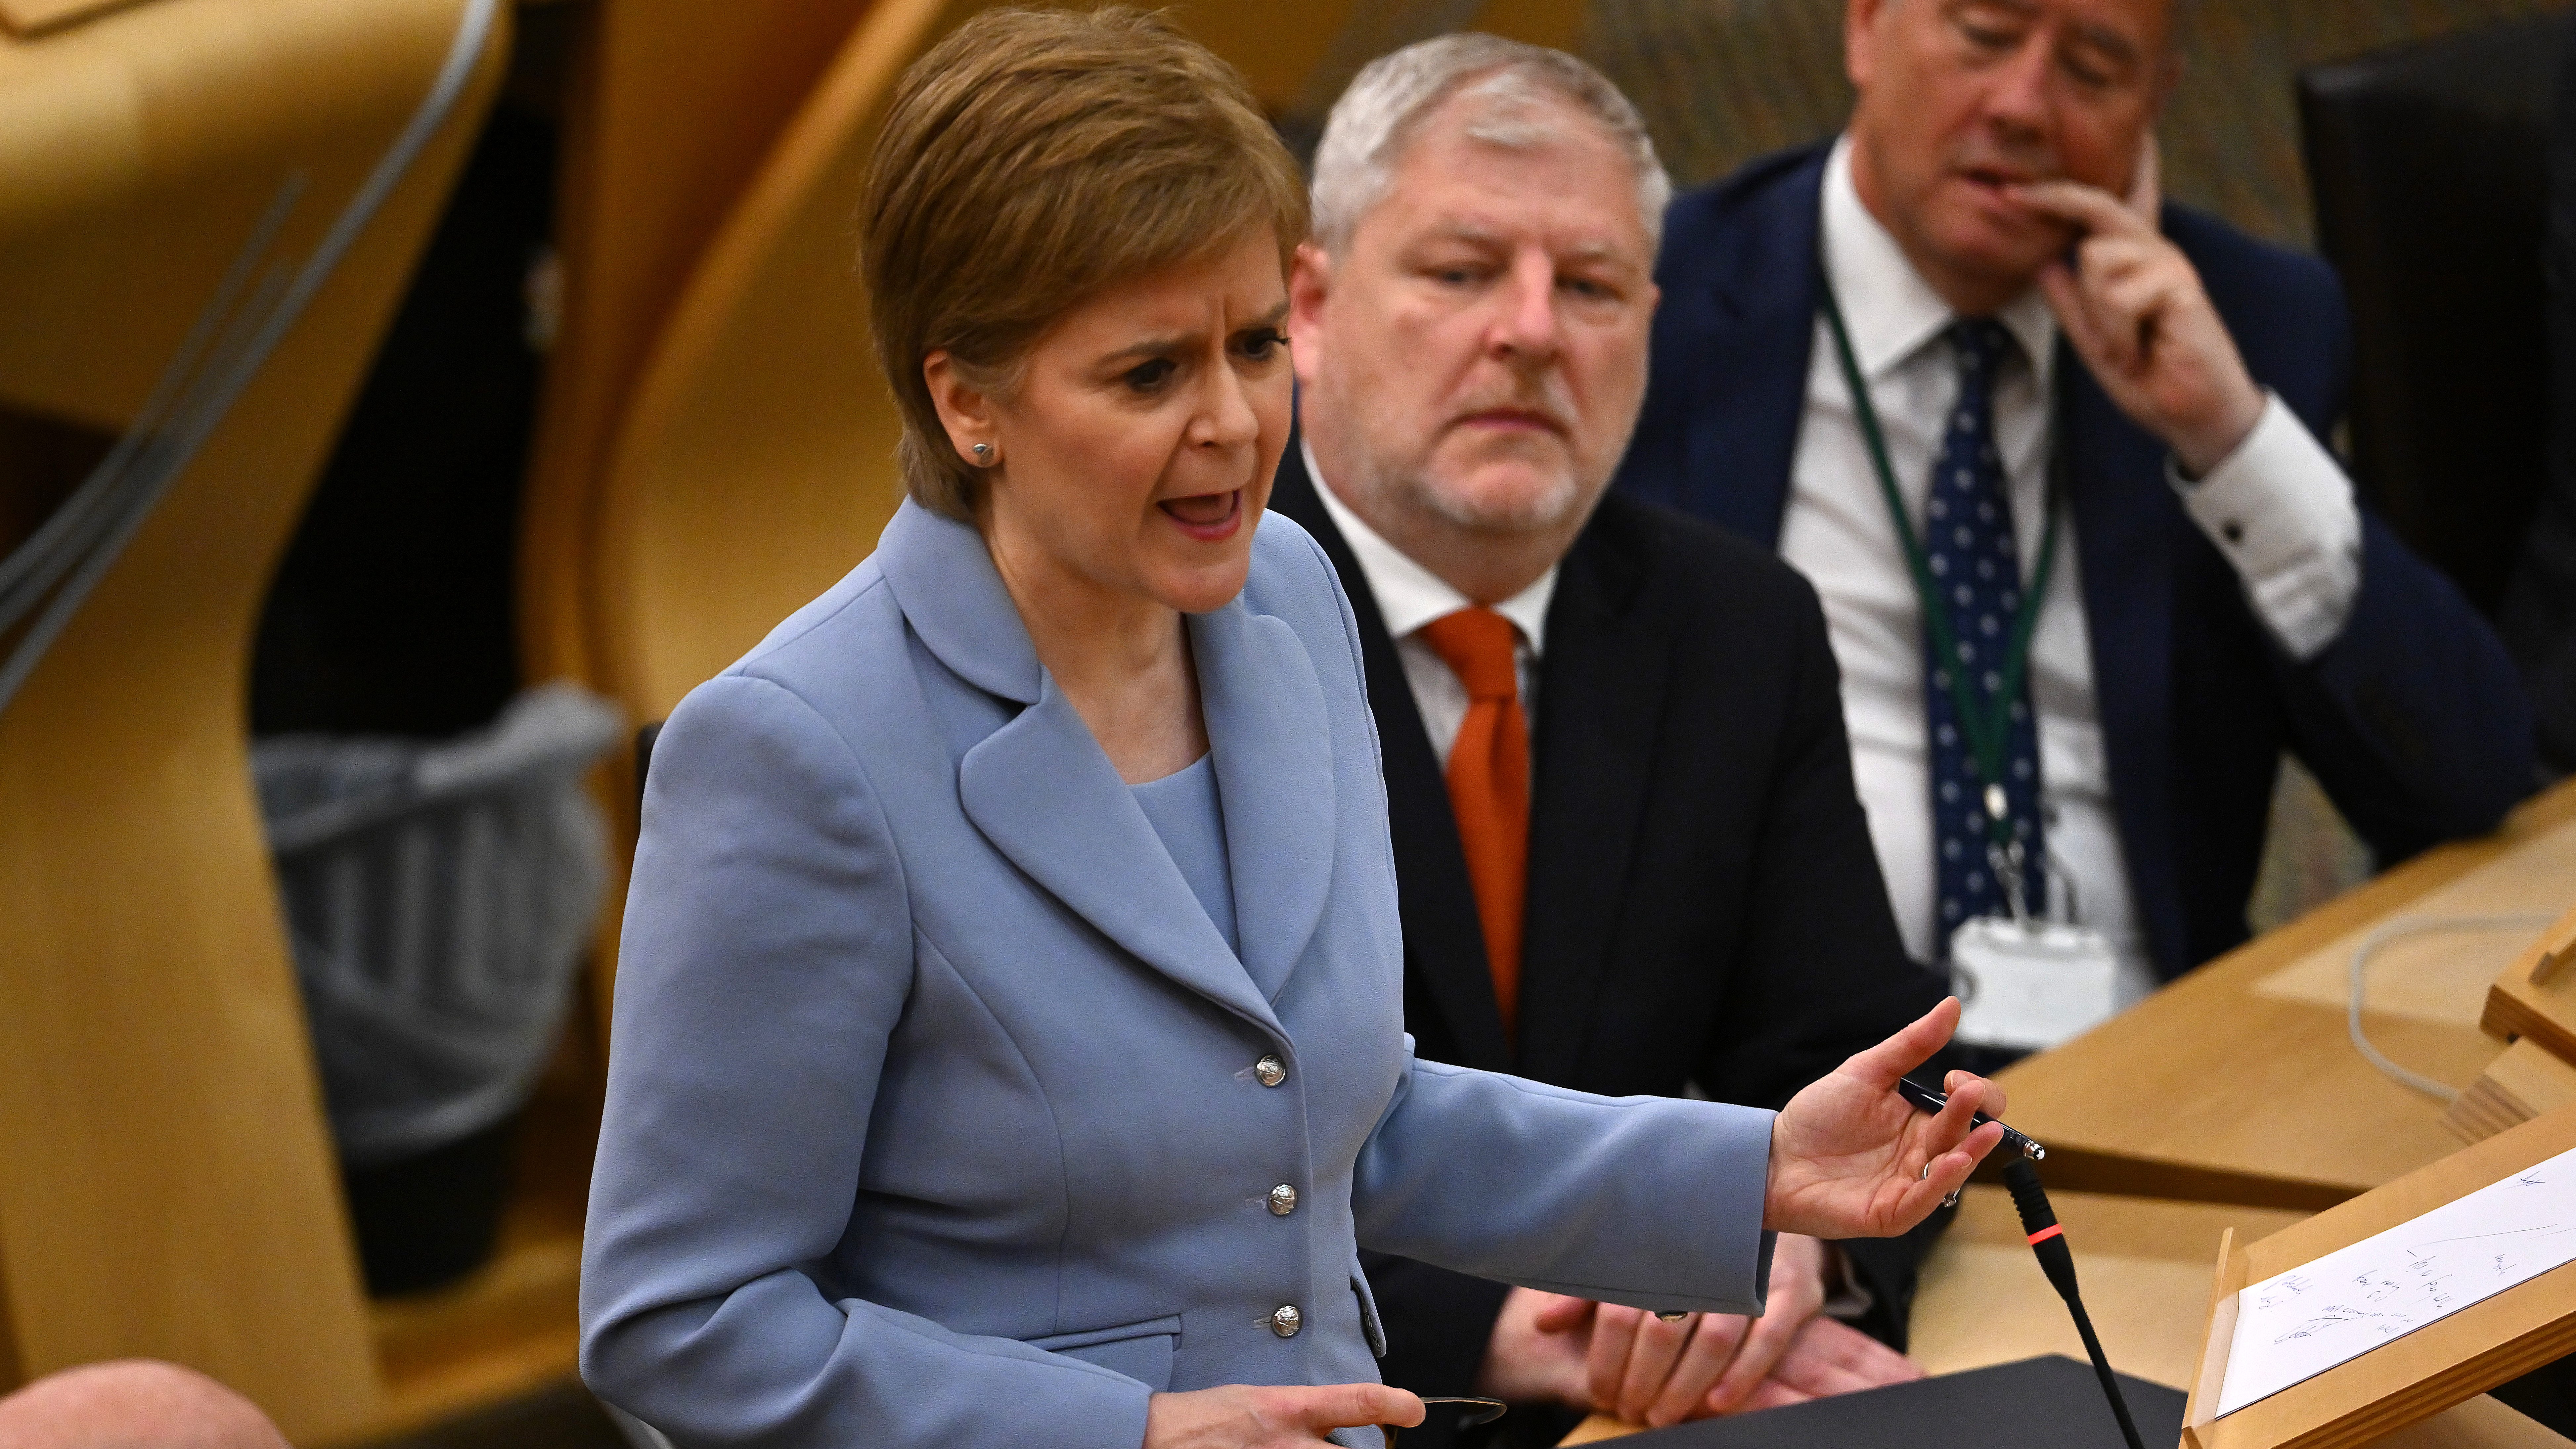 Scotland plans new referendum for its independence from Britain in 2023